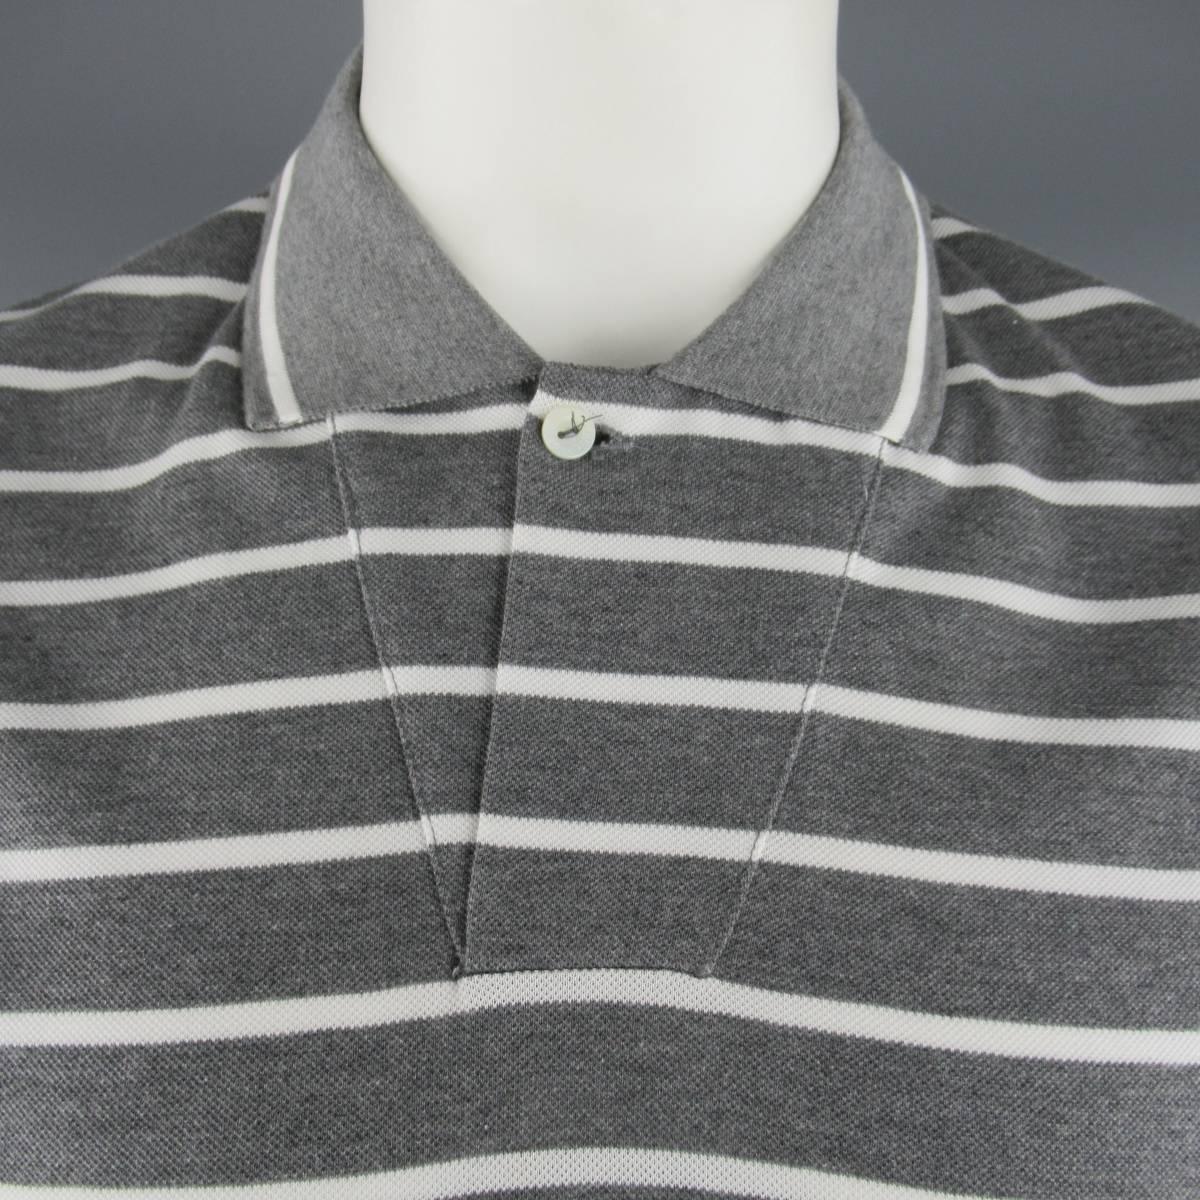 Classic LORO PIANA polo comes in dark heather gray & white stripe cotton pique with a diagonal seam single button closure. Made in Italy.
 
New with Tags.
Marked: XXL
 
Measurements:
 
Shoulder: 20 in.
Chest: 47 in.
Sleeve: 9 in.
Length: 29